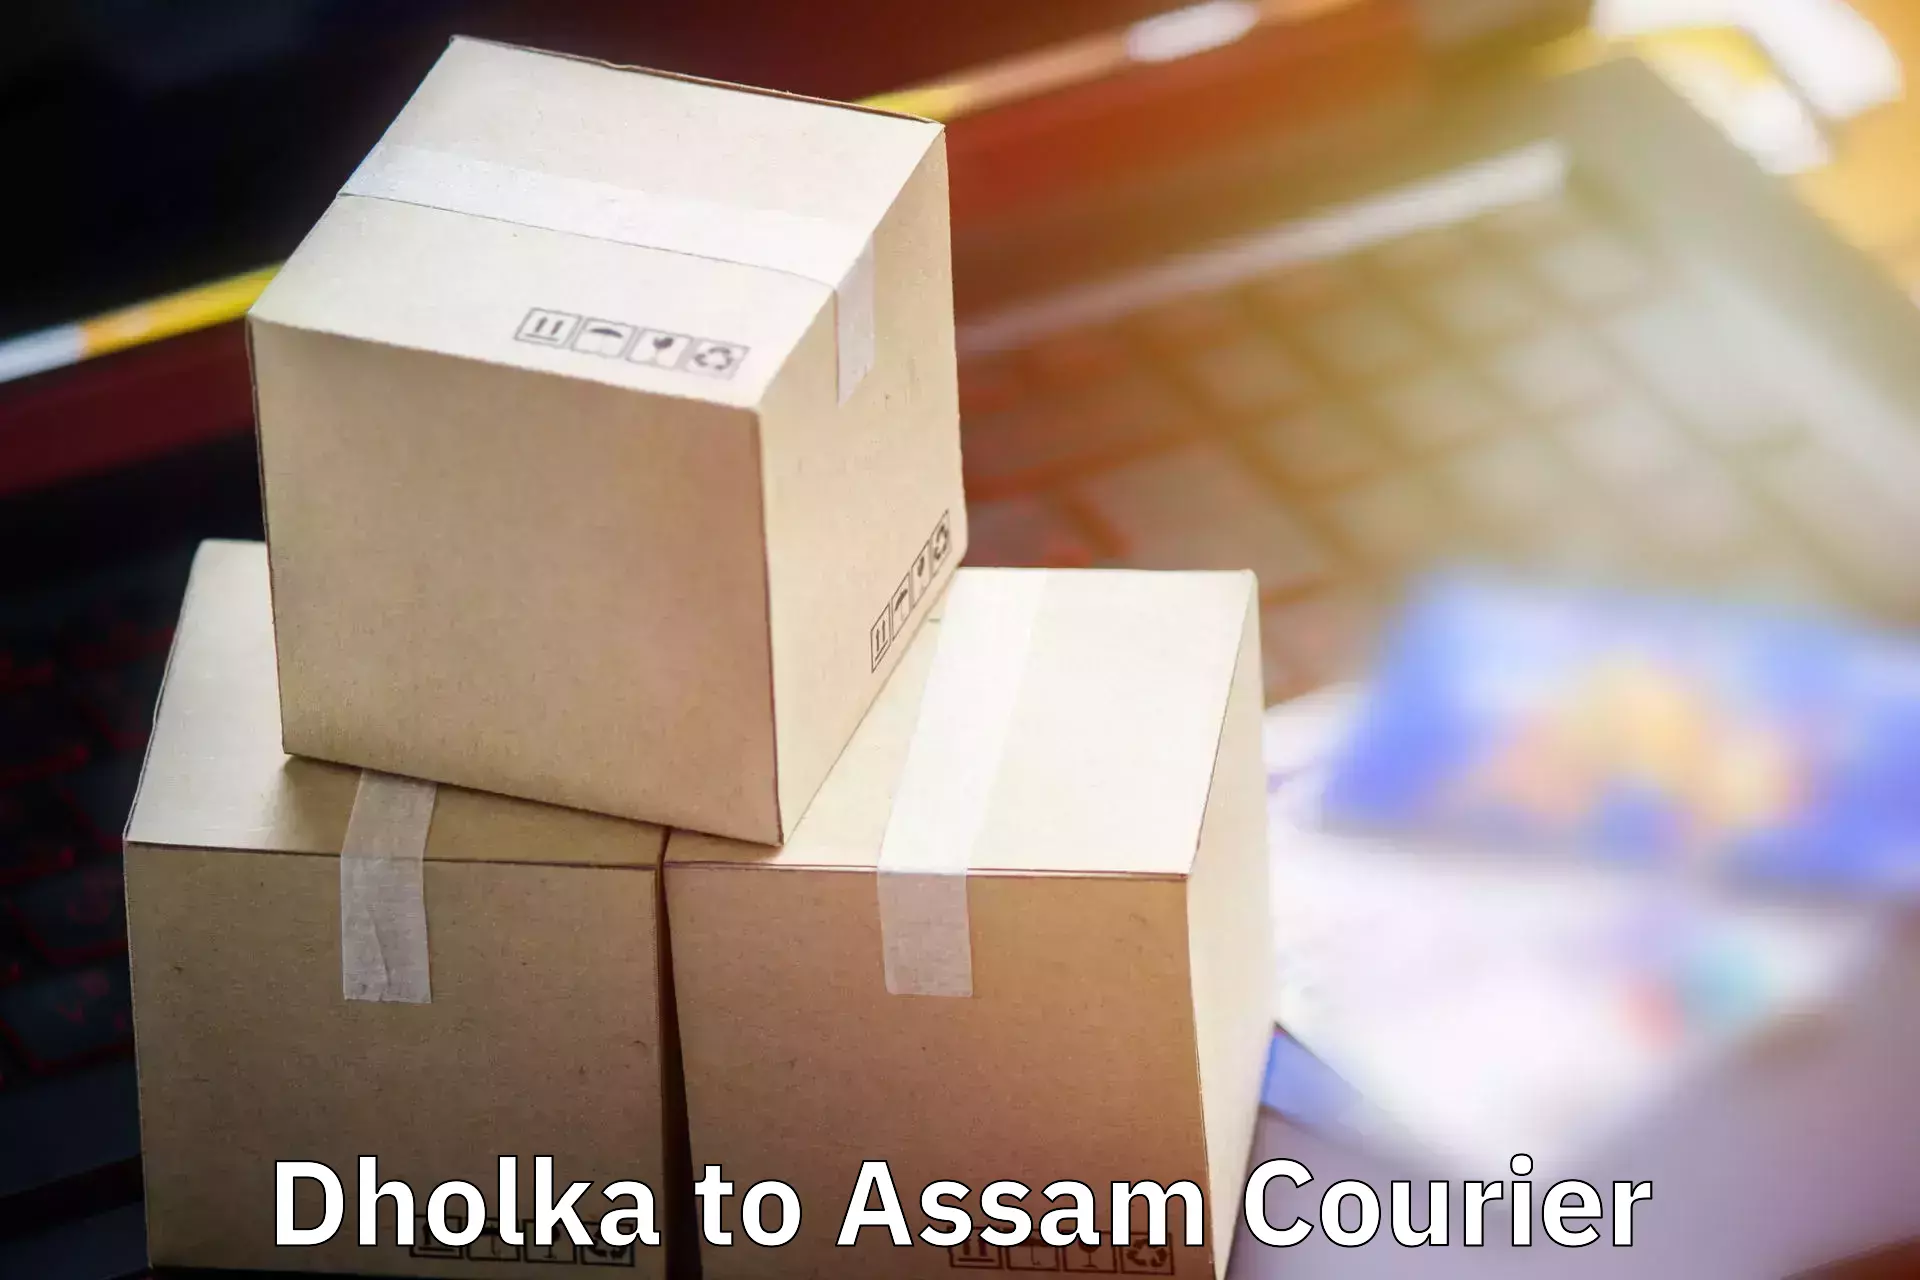 Baggage shipping service Dholka to Assam